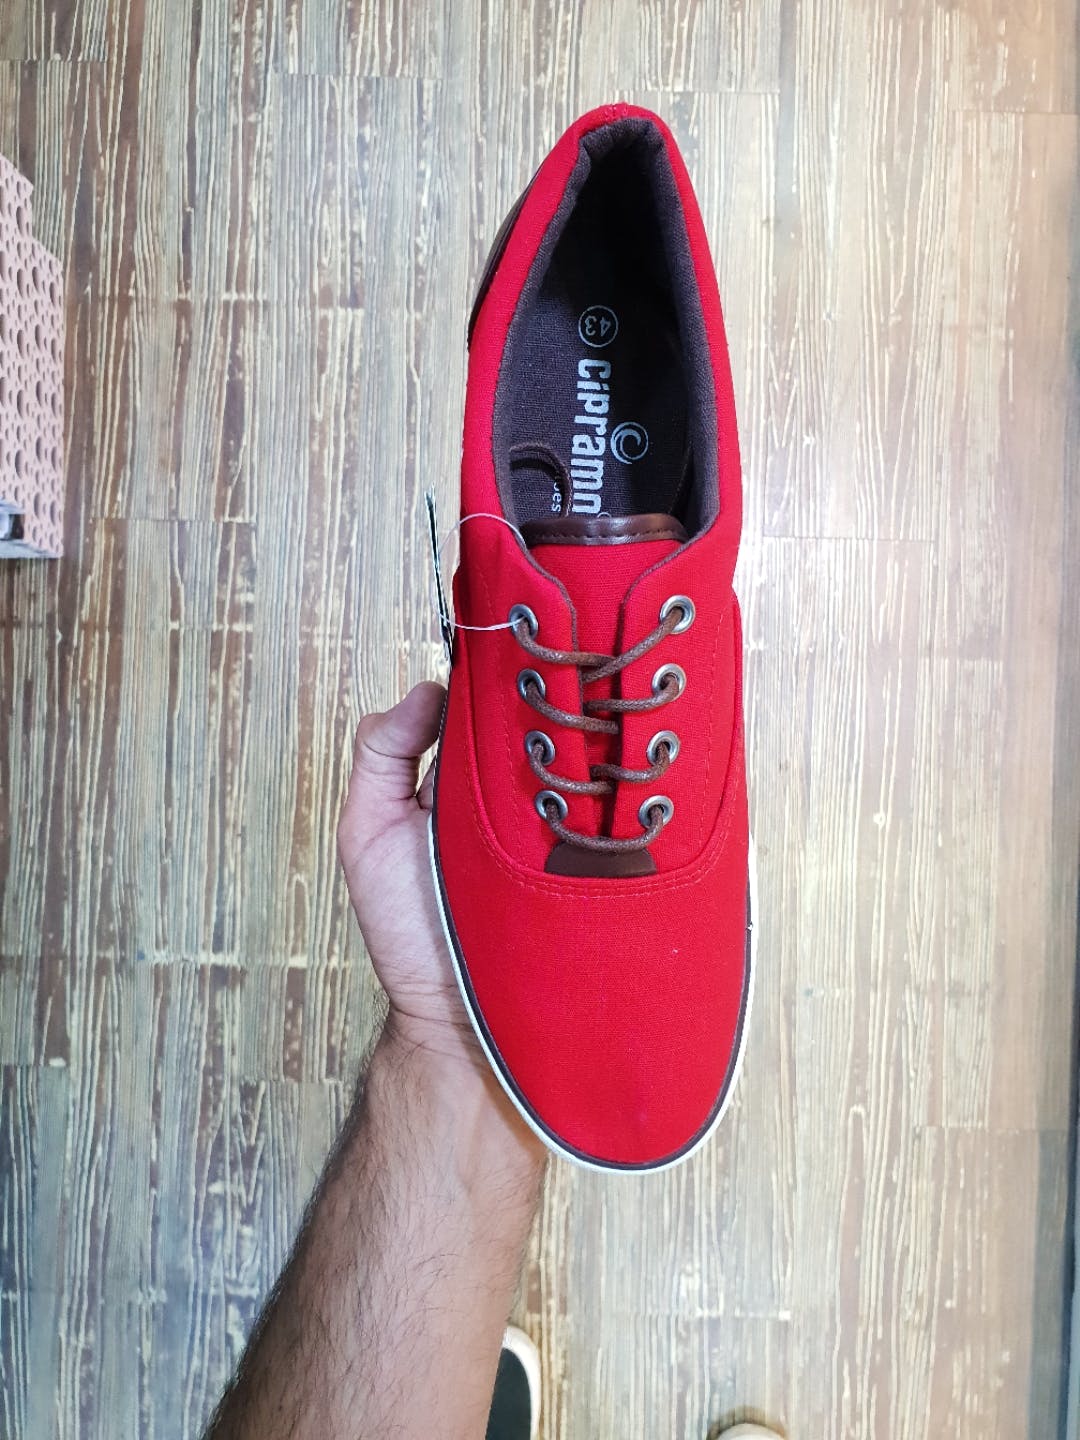 cipramo red shoes price